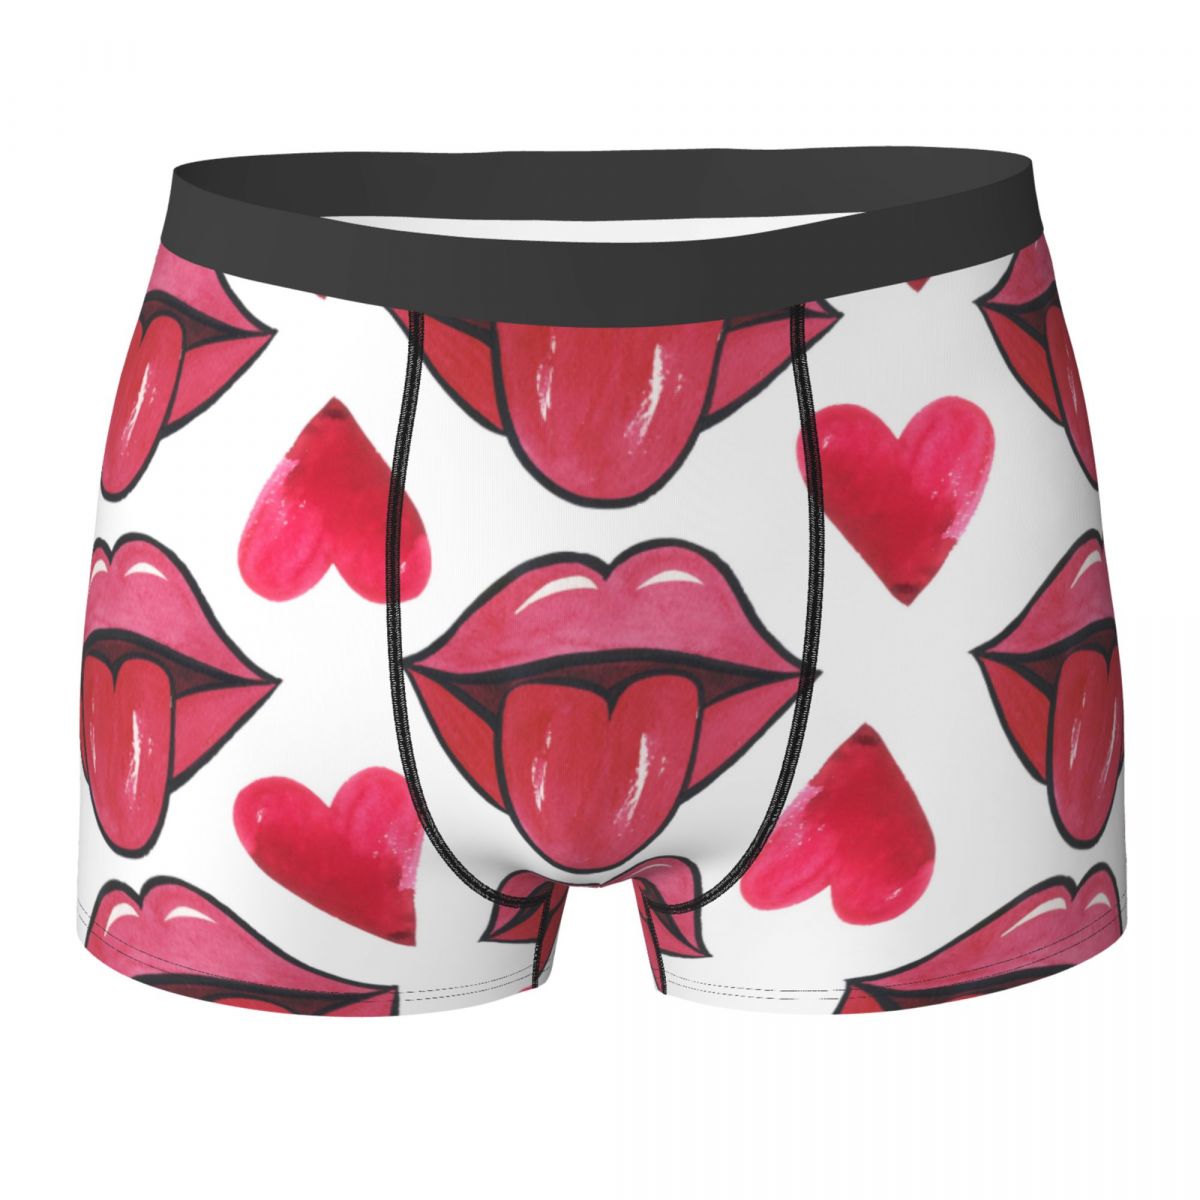 Red Lips And Heart Man Underwear Boxer Briefs Shorts Panties Funny Breathable Underpants for Male S-XXL